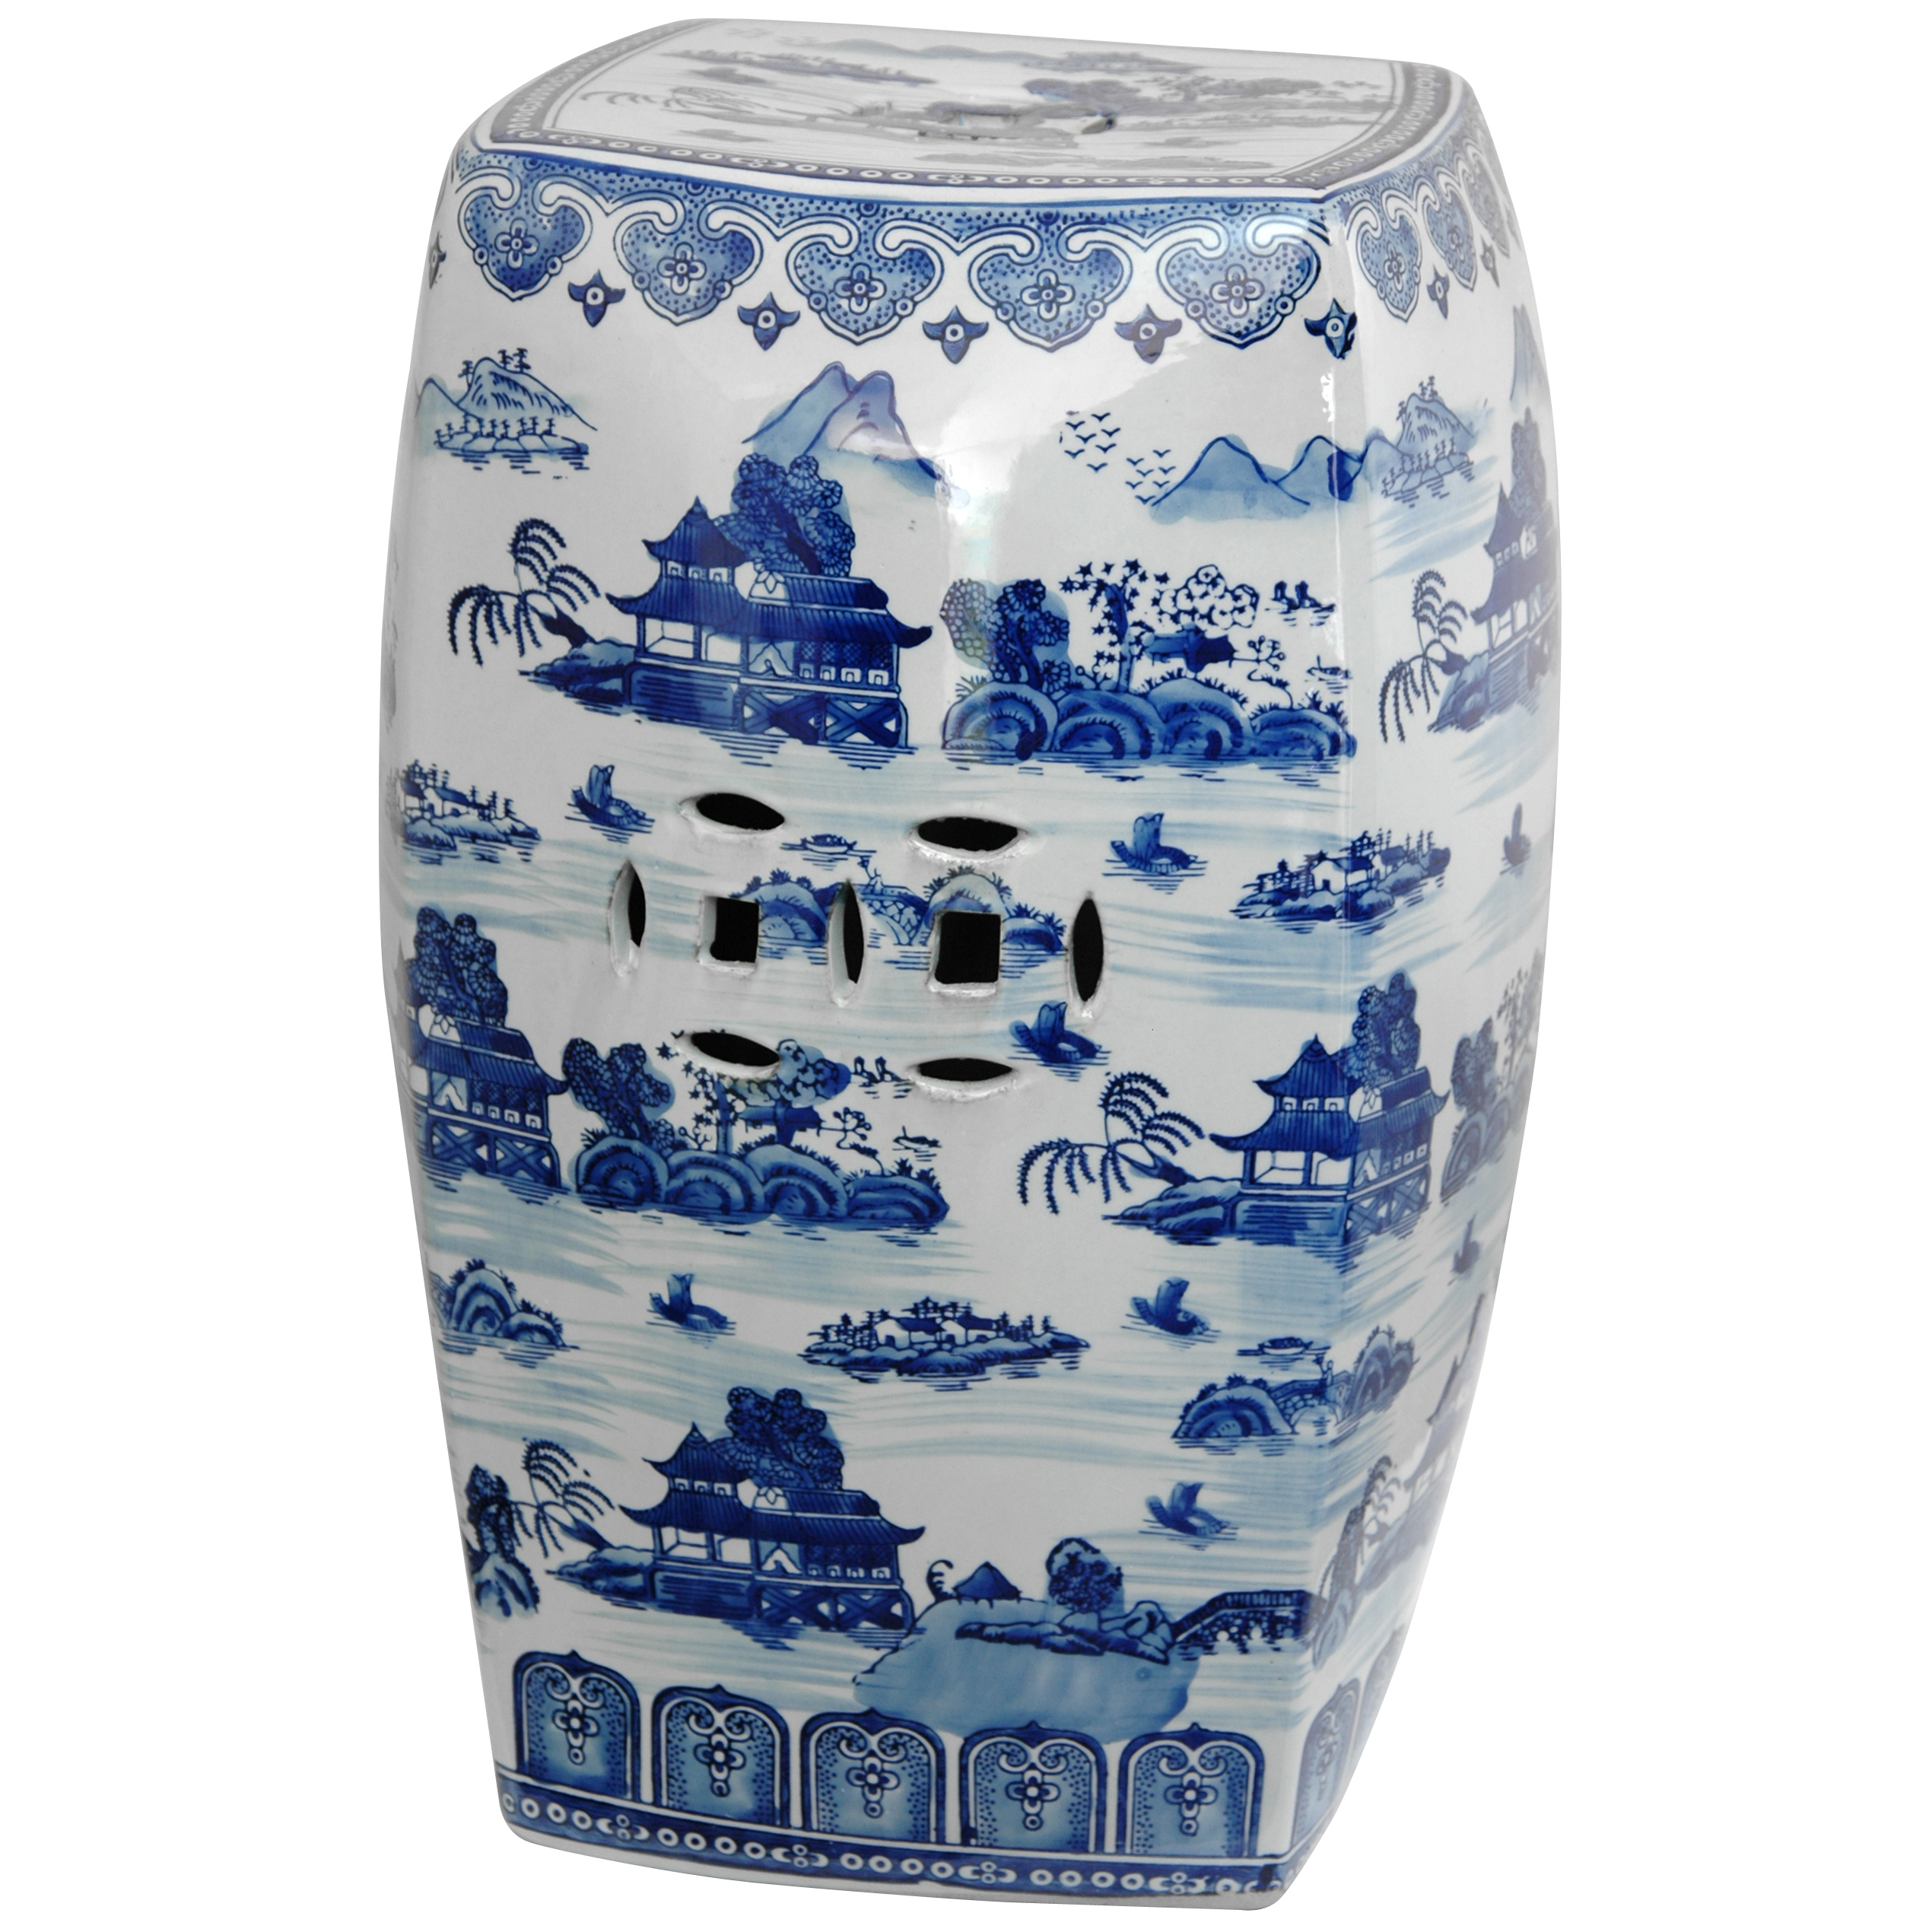 Oriental Furniture Distinctive Oriental Accessories, 18-Inch Blue and White Chinese Porcelain Garden Stool, Square with Landscape Design